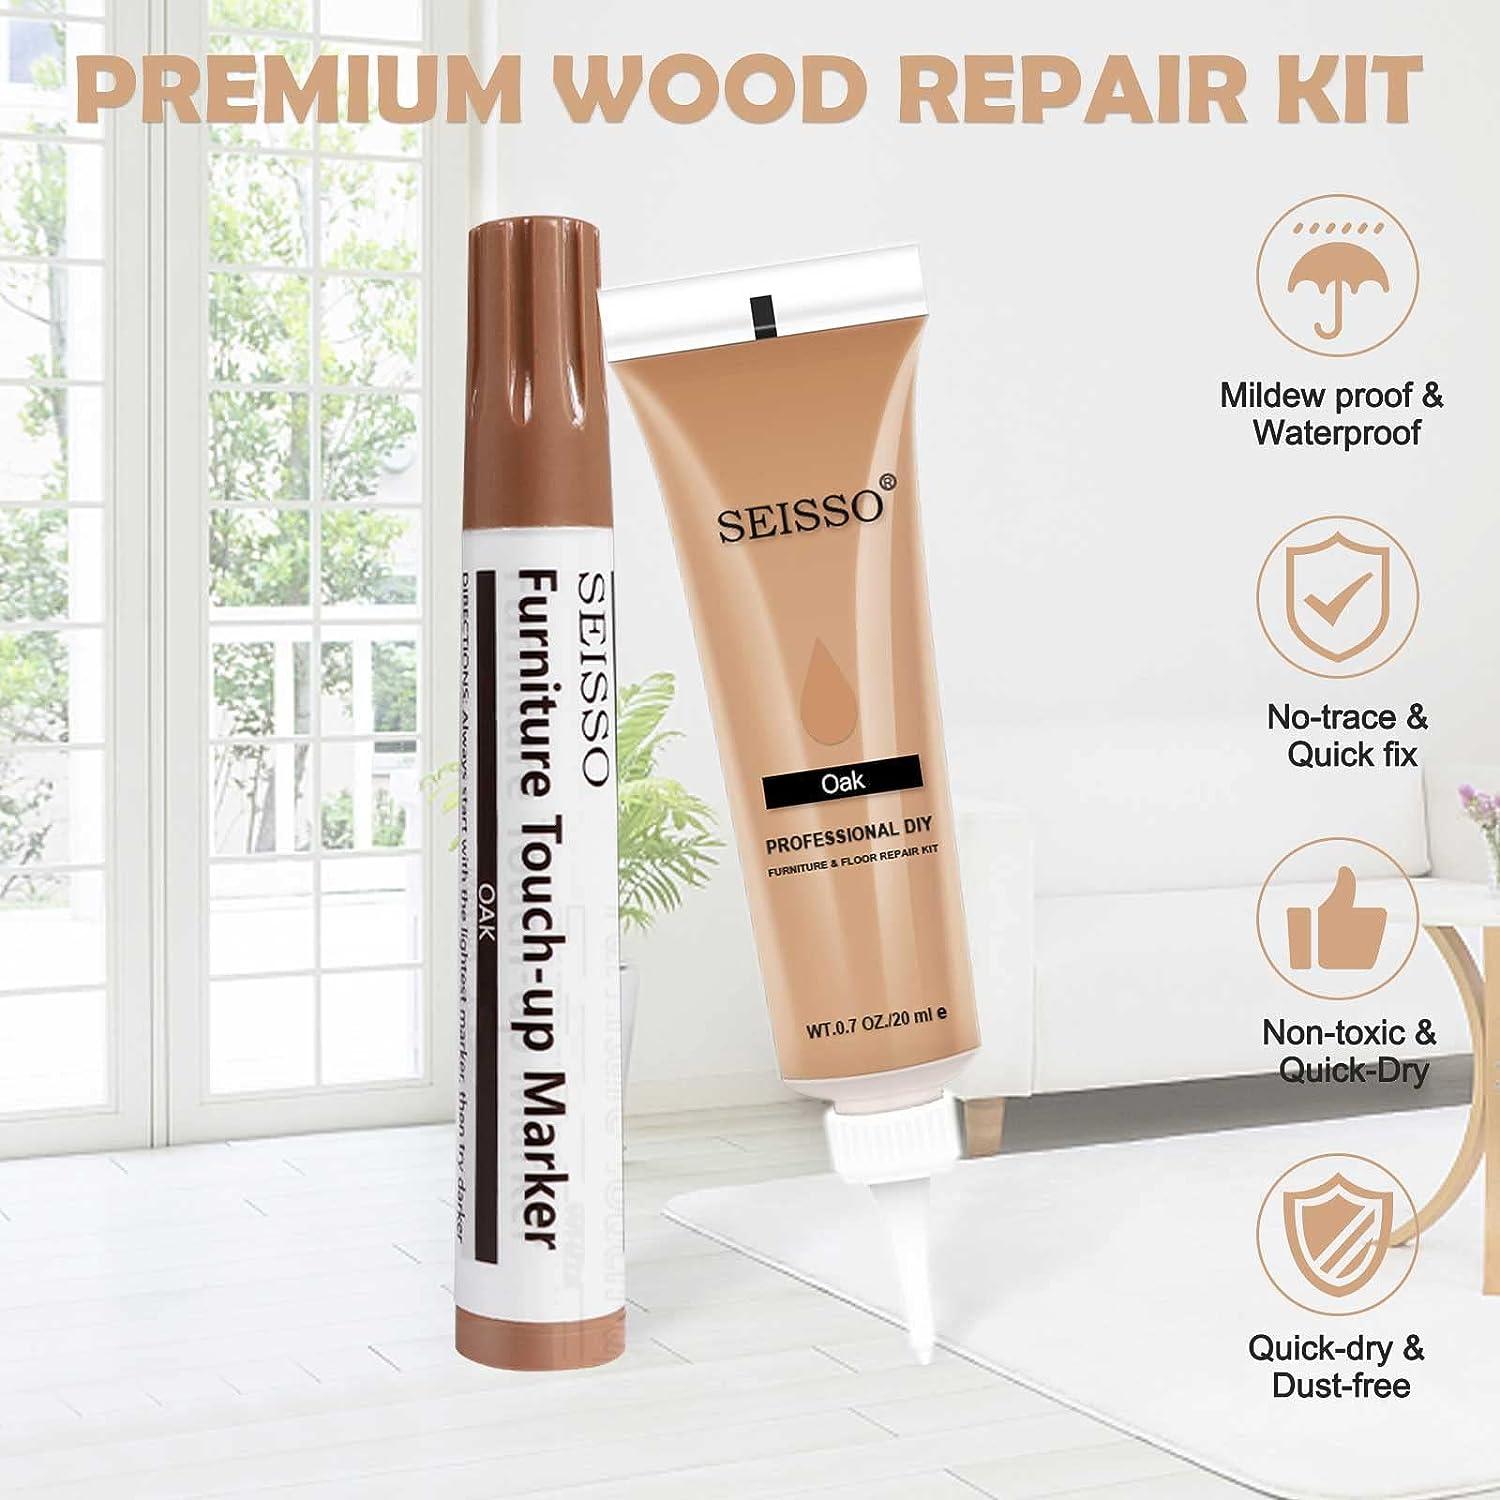 SEISSO Furniture Repair Kit, Wood Markers for Scratches, 12 Colors Furniture  Touch-up Markers and Wood Fillers, New Upgrade Wood Repair Kit - Restore  Wooden Table, Cabinet, Floors, Door